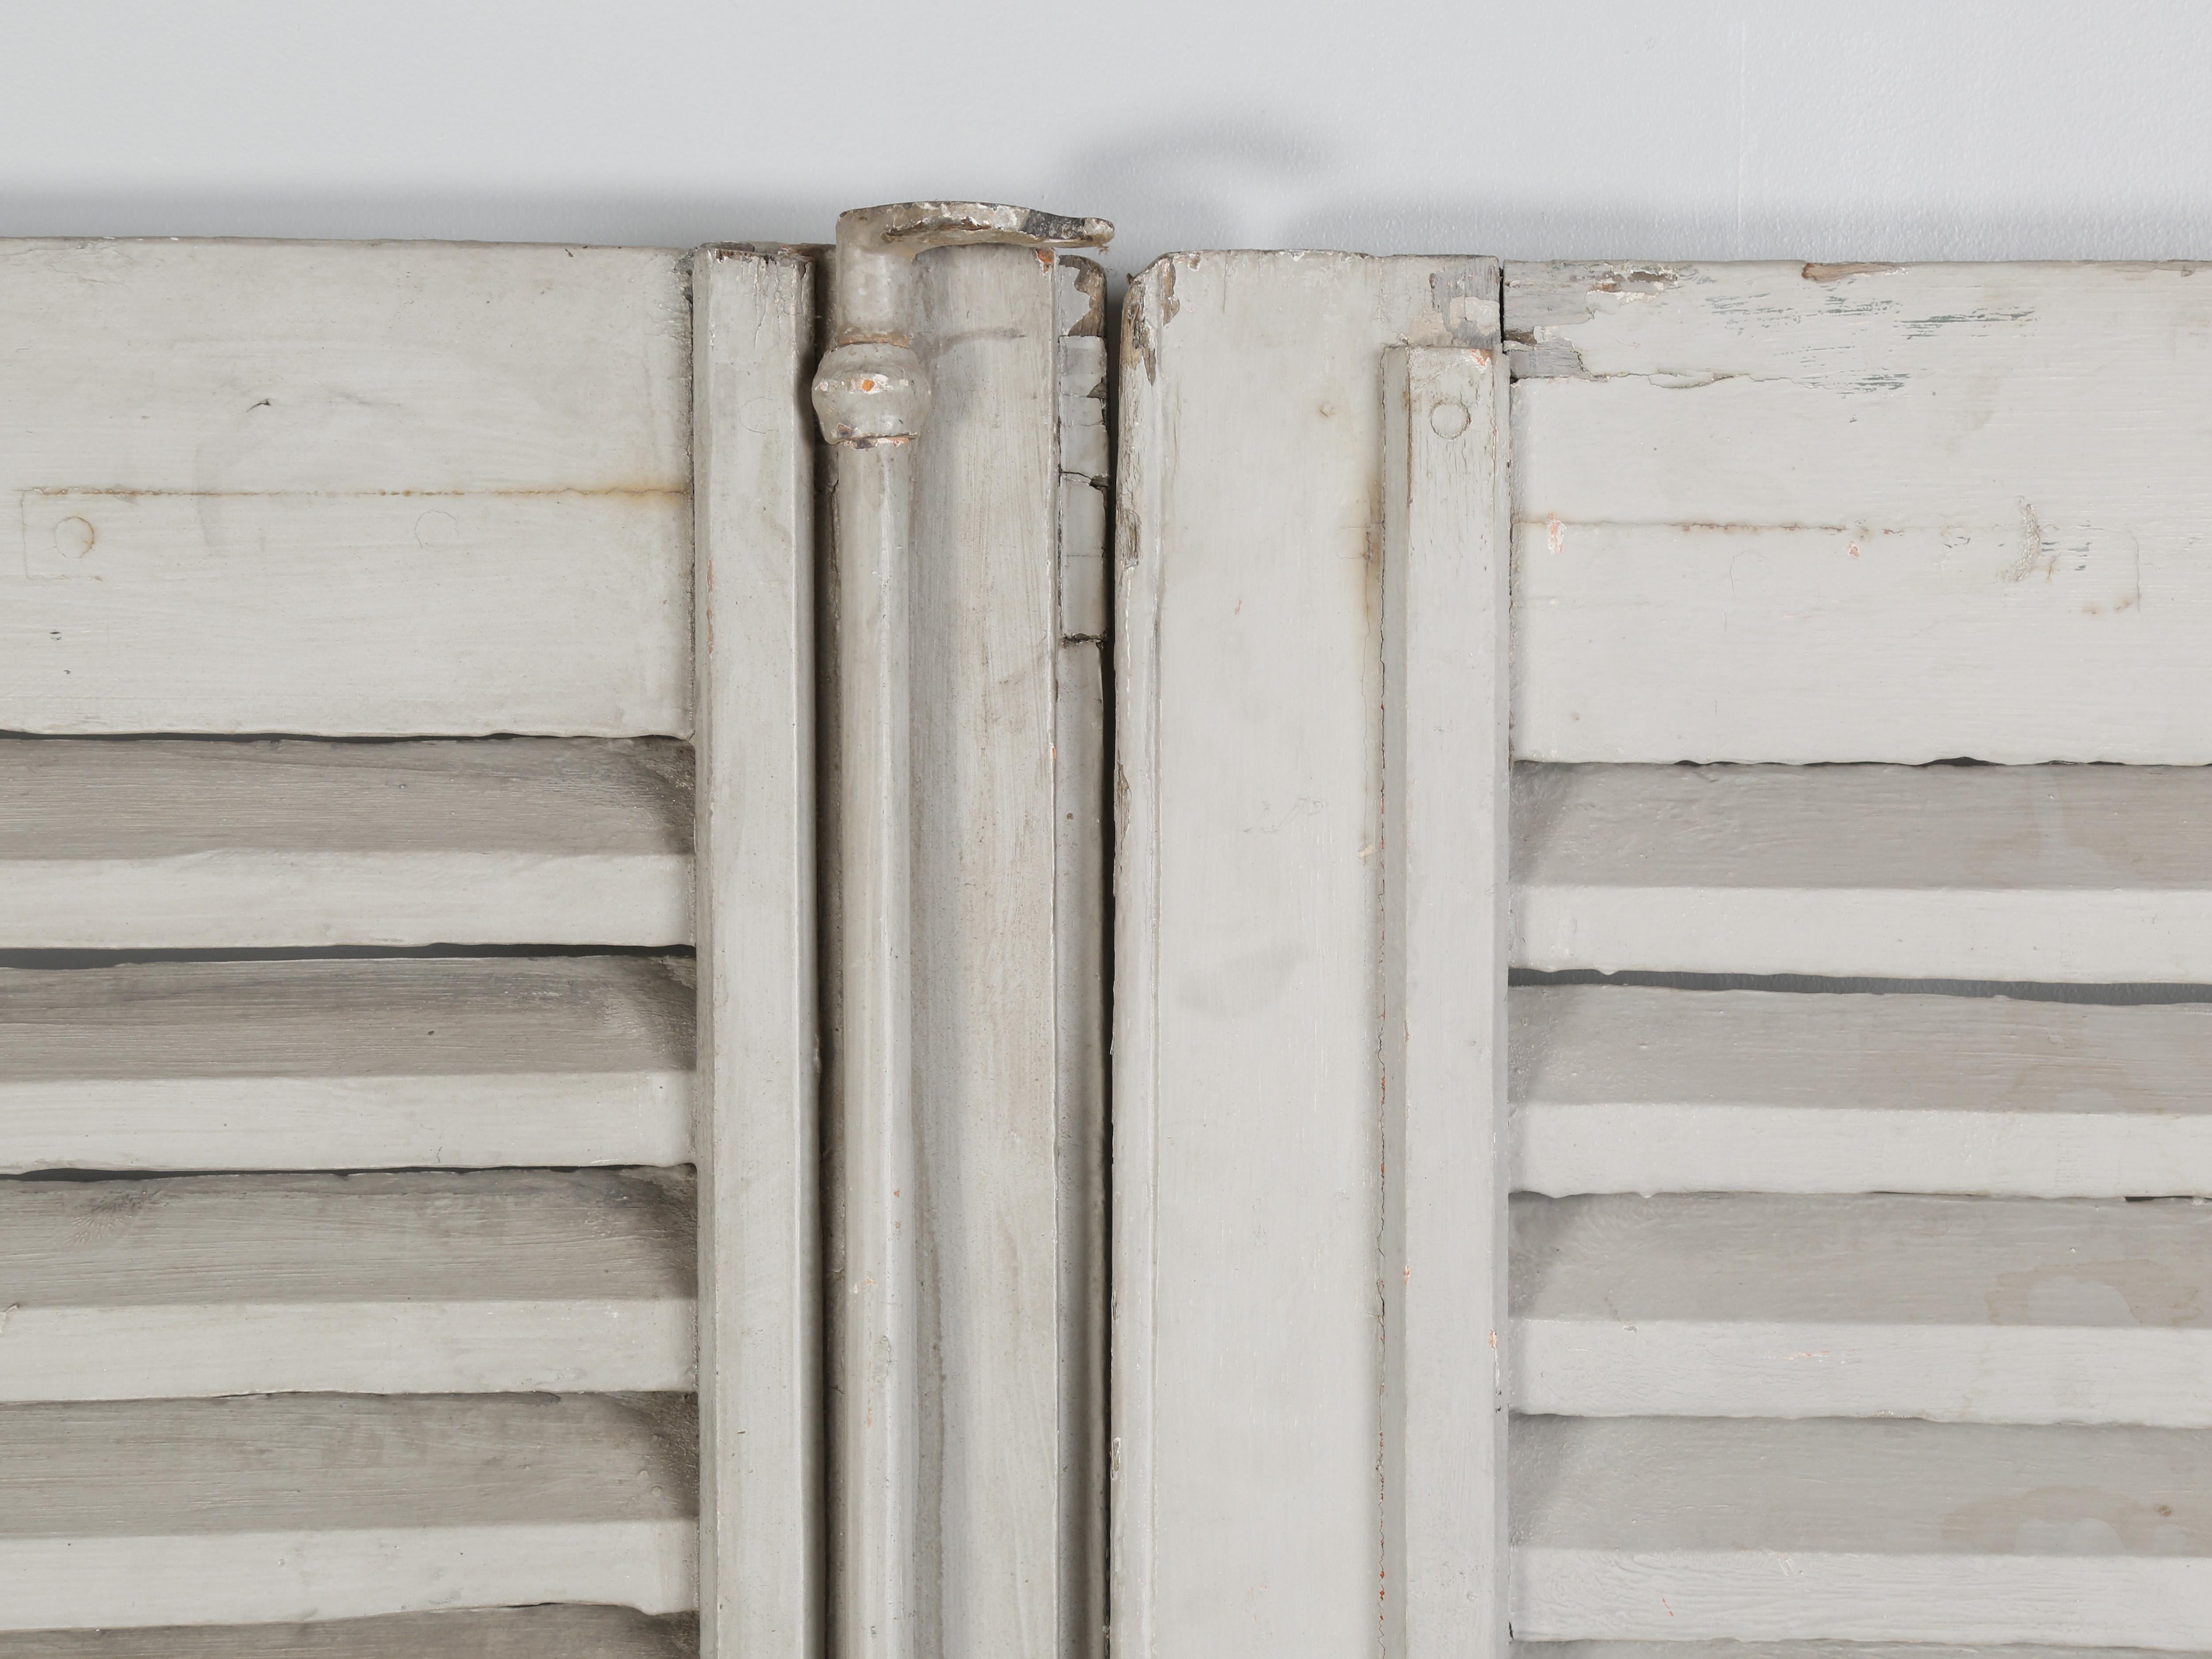 Antique 18th century French Shutters in old putty grey paint. In total, we currently have a grouping of (14) individual shutters, or (7) pairs. The antique French shutters came from a chateau outside of Perpignan in Southwest France, which has a